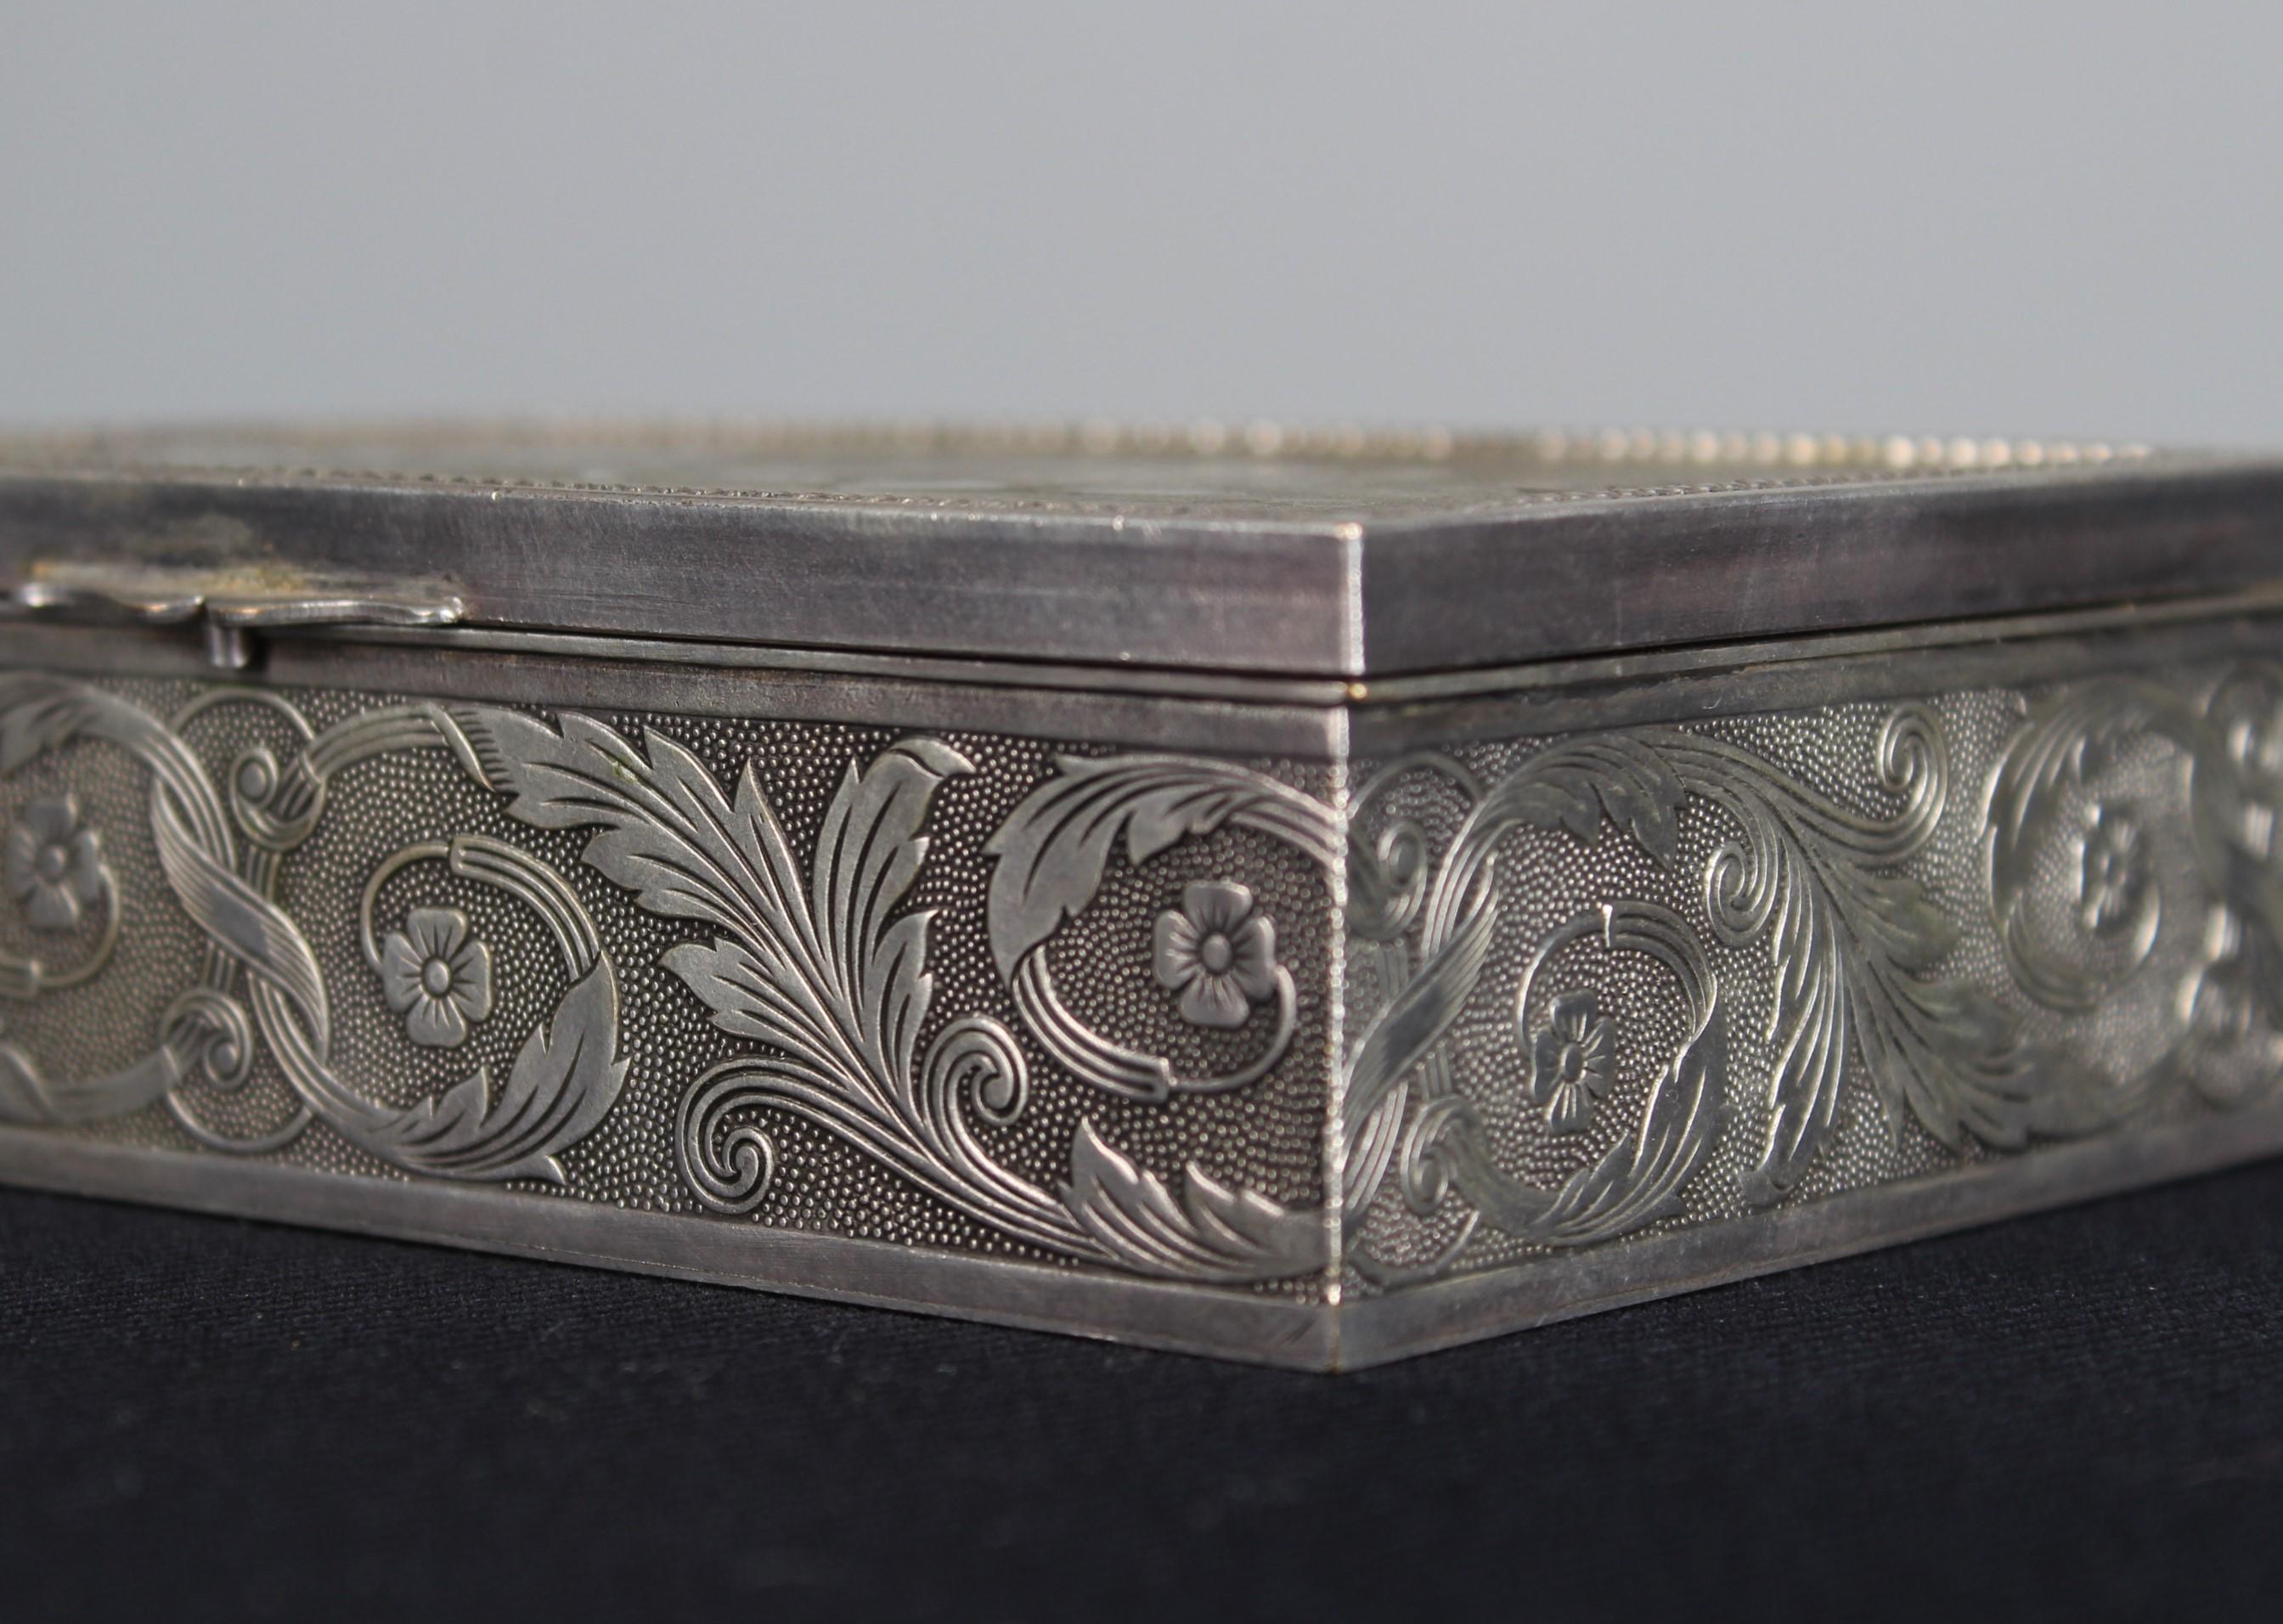 Beautiful silver-plated brass jewelry box, France, 1880s.
Fine flower tendrils and blossom decorations on all sides. The lid shows a scene from an taverne, the landlady pouring wine from a carafe for a musician. Beautiful attention to detail on the